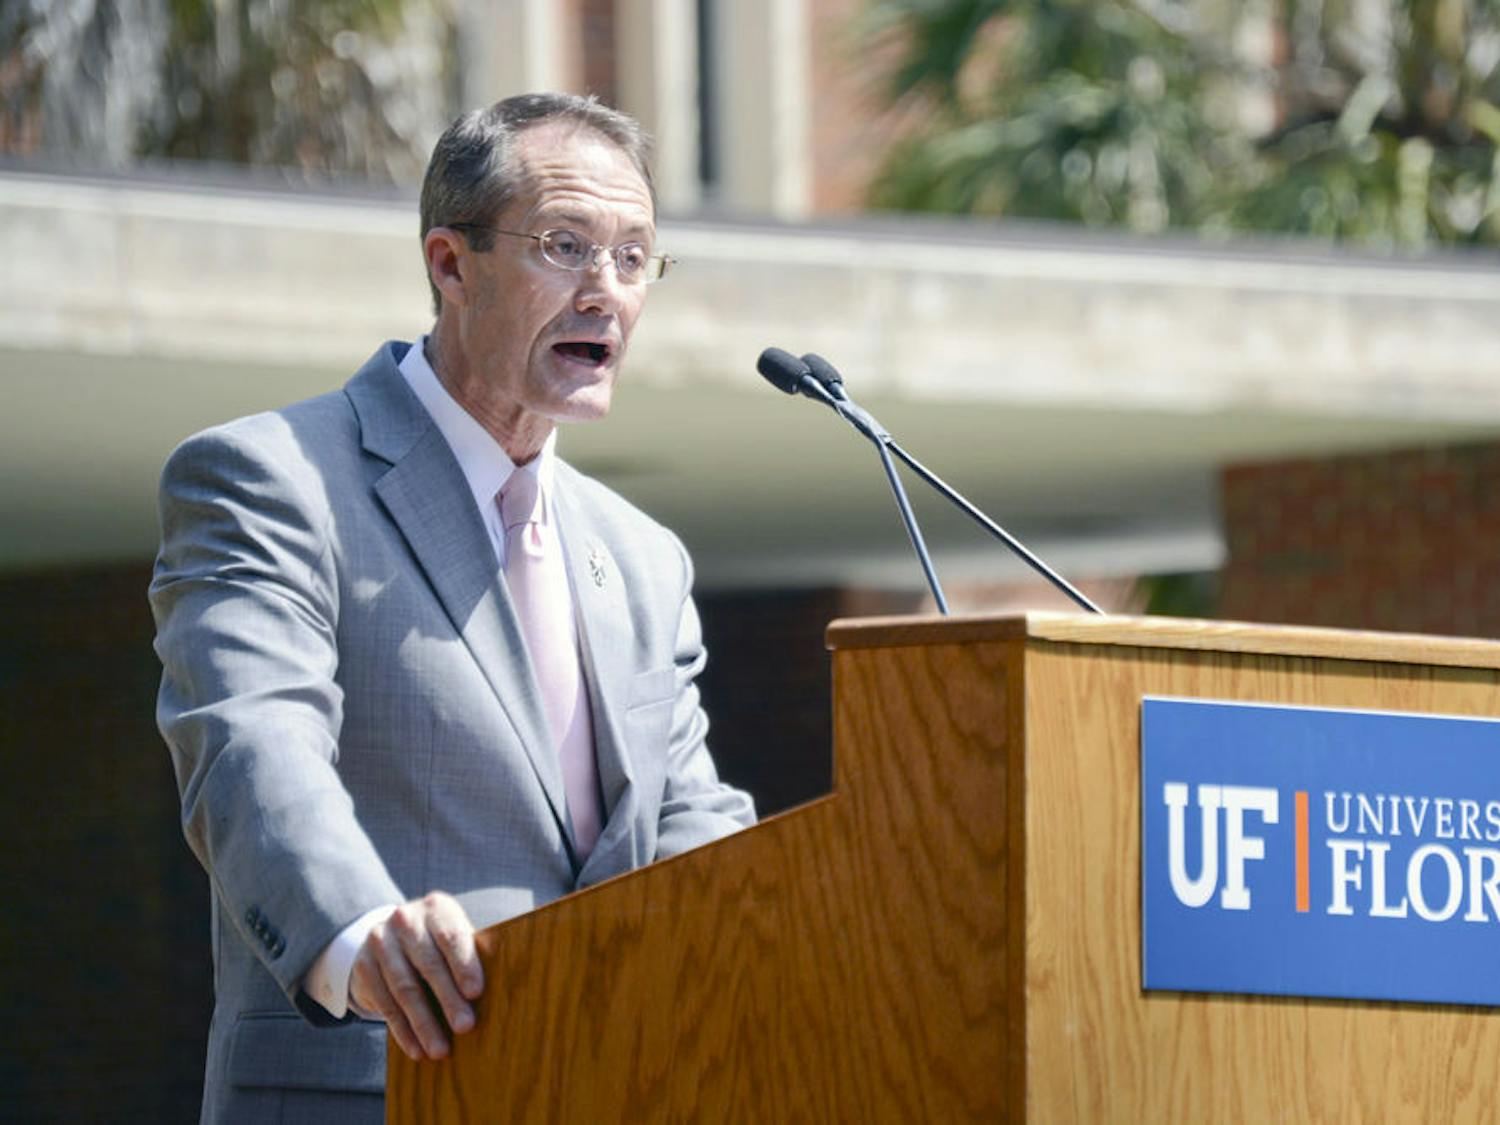 Dr. Charlie Lane, senior vice president of UF, speaks to a crowd on Plaza of the Americas on Wednesday about UF’s sustainability achievements and goals. “What’s really important is that students who recycle, ride the bus or learn about composing will embrace these actions for the rest of their lives,” Lane said.